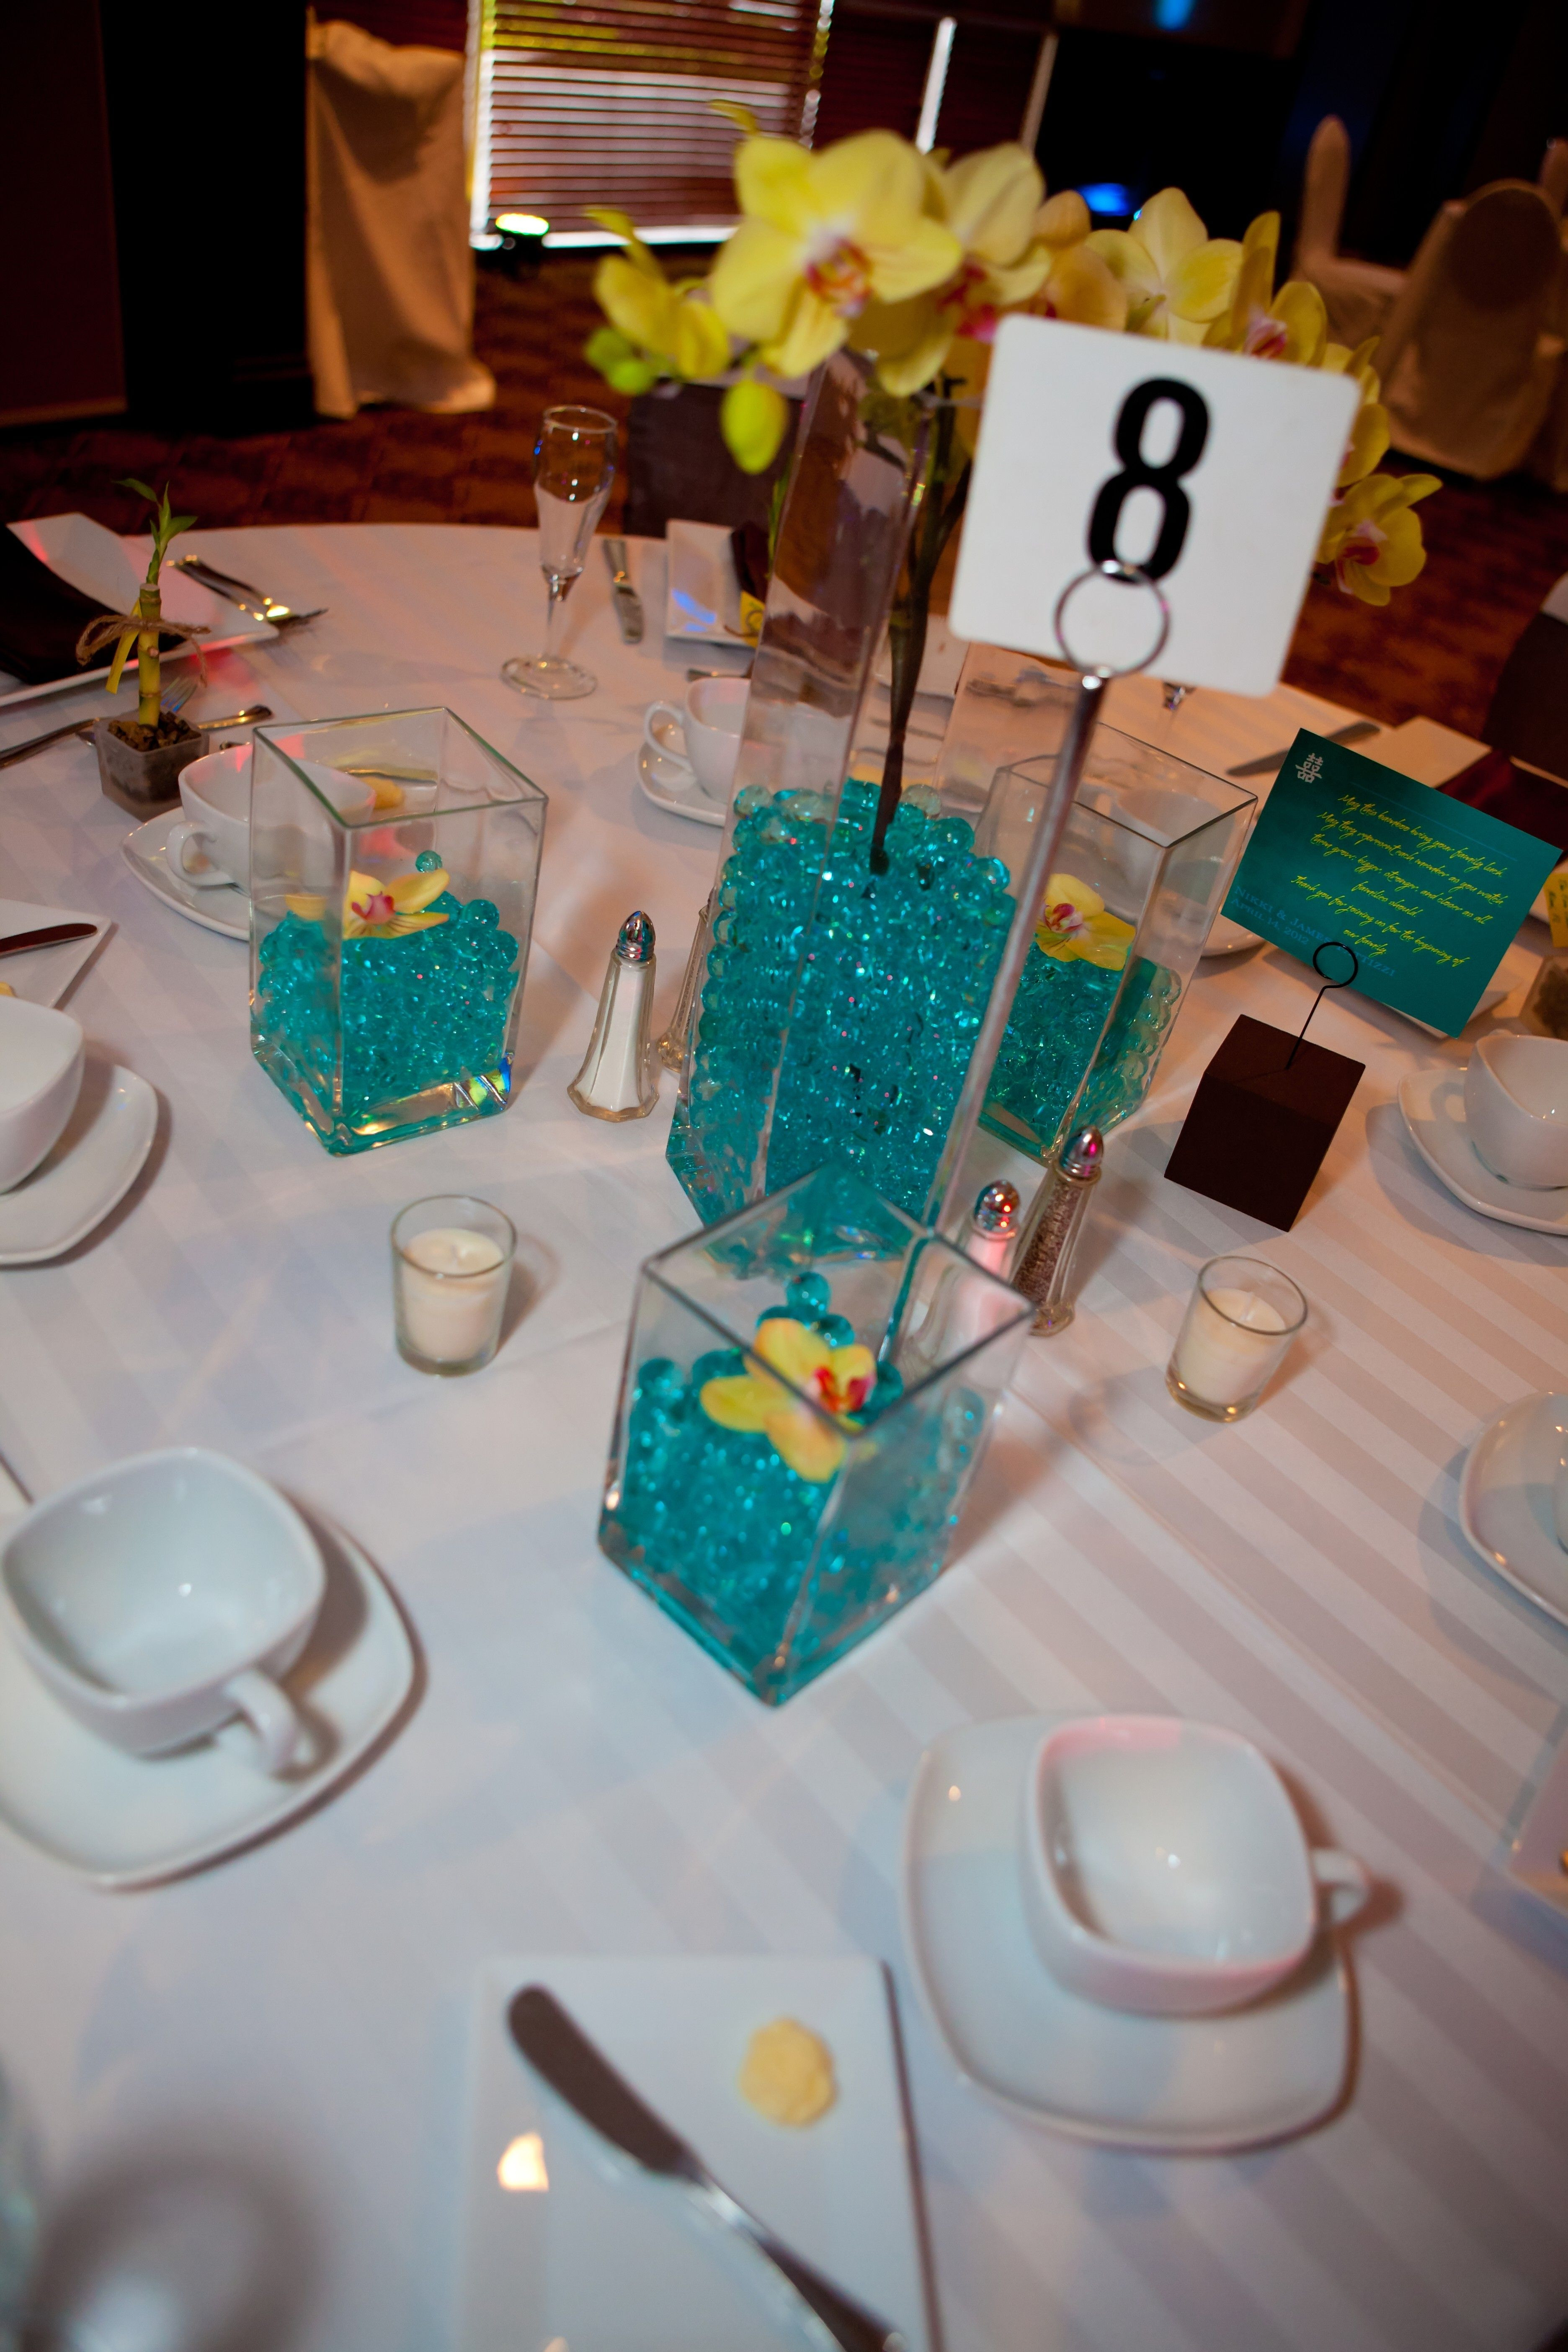 27 Stunning Family Dollar Flower Vases 2024 free download family dollar flower vases of wedding centerpieces square vases teal water beads yellow regarding square vases teal water beads yellow orchids candles